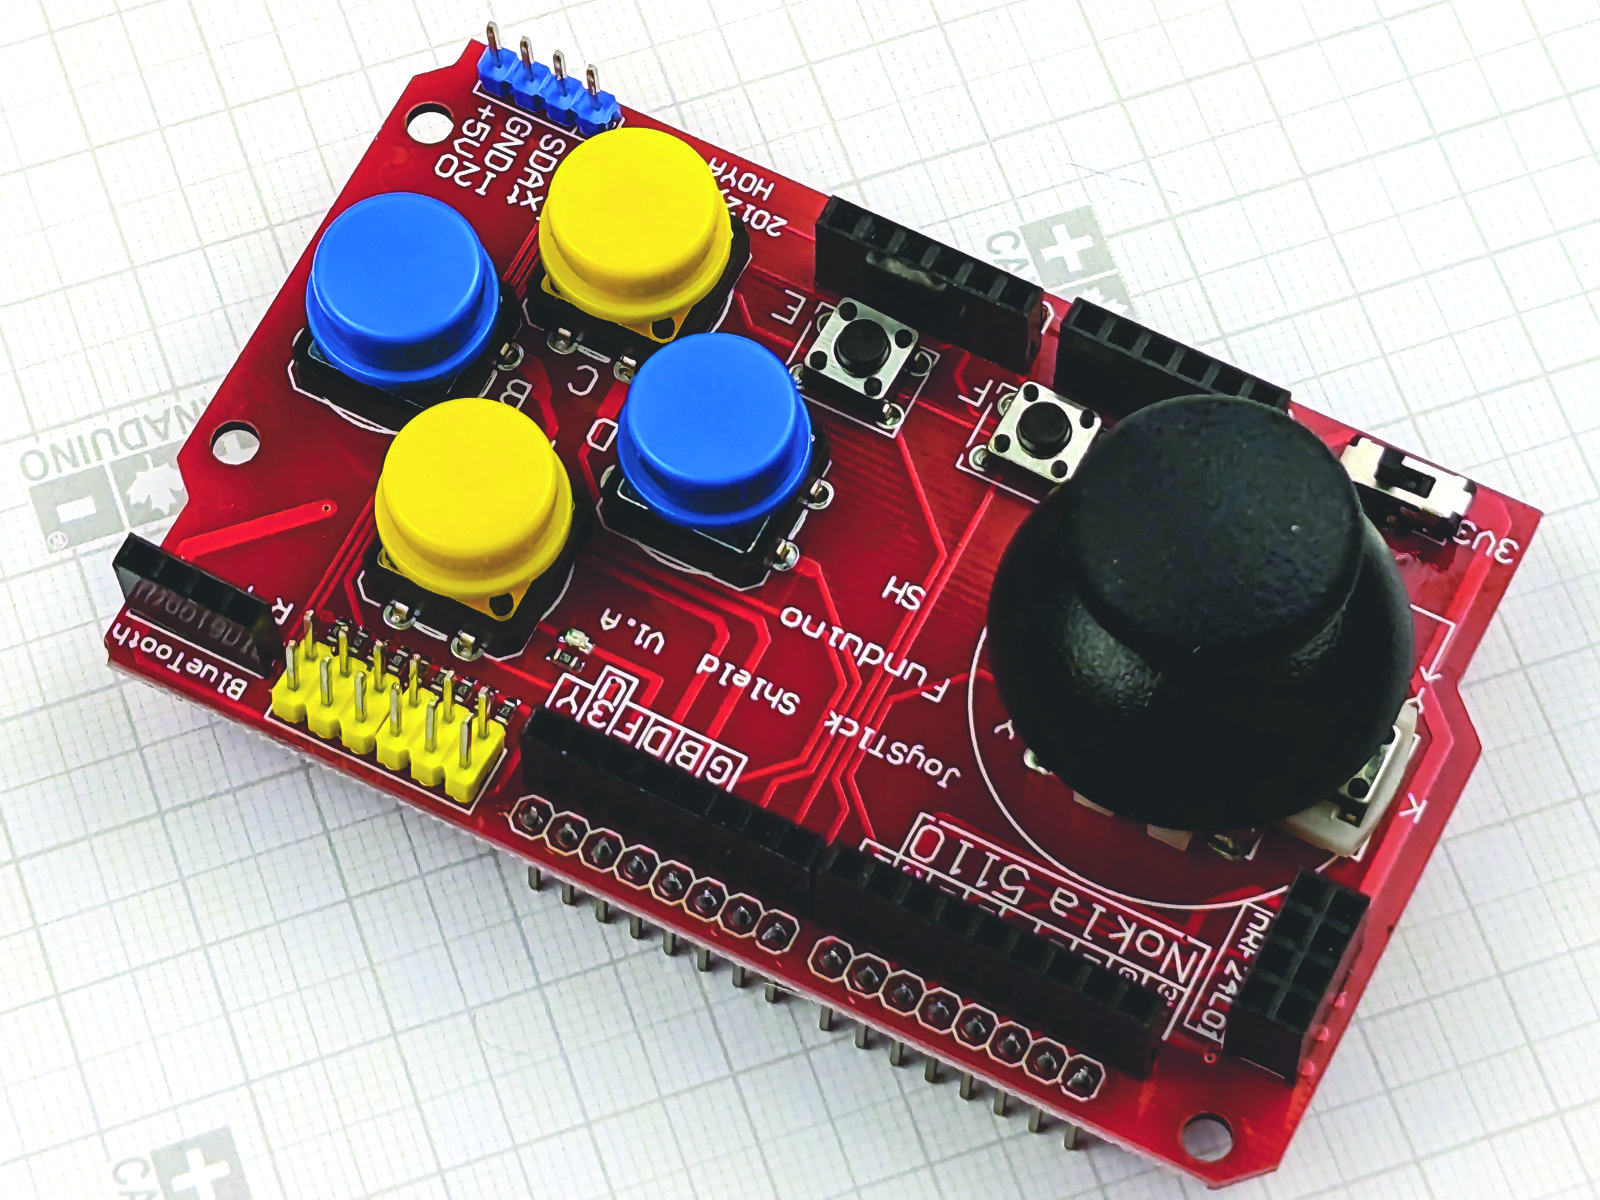 gamepad for Arduino UNO with joystick and buttons 2